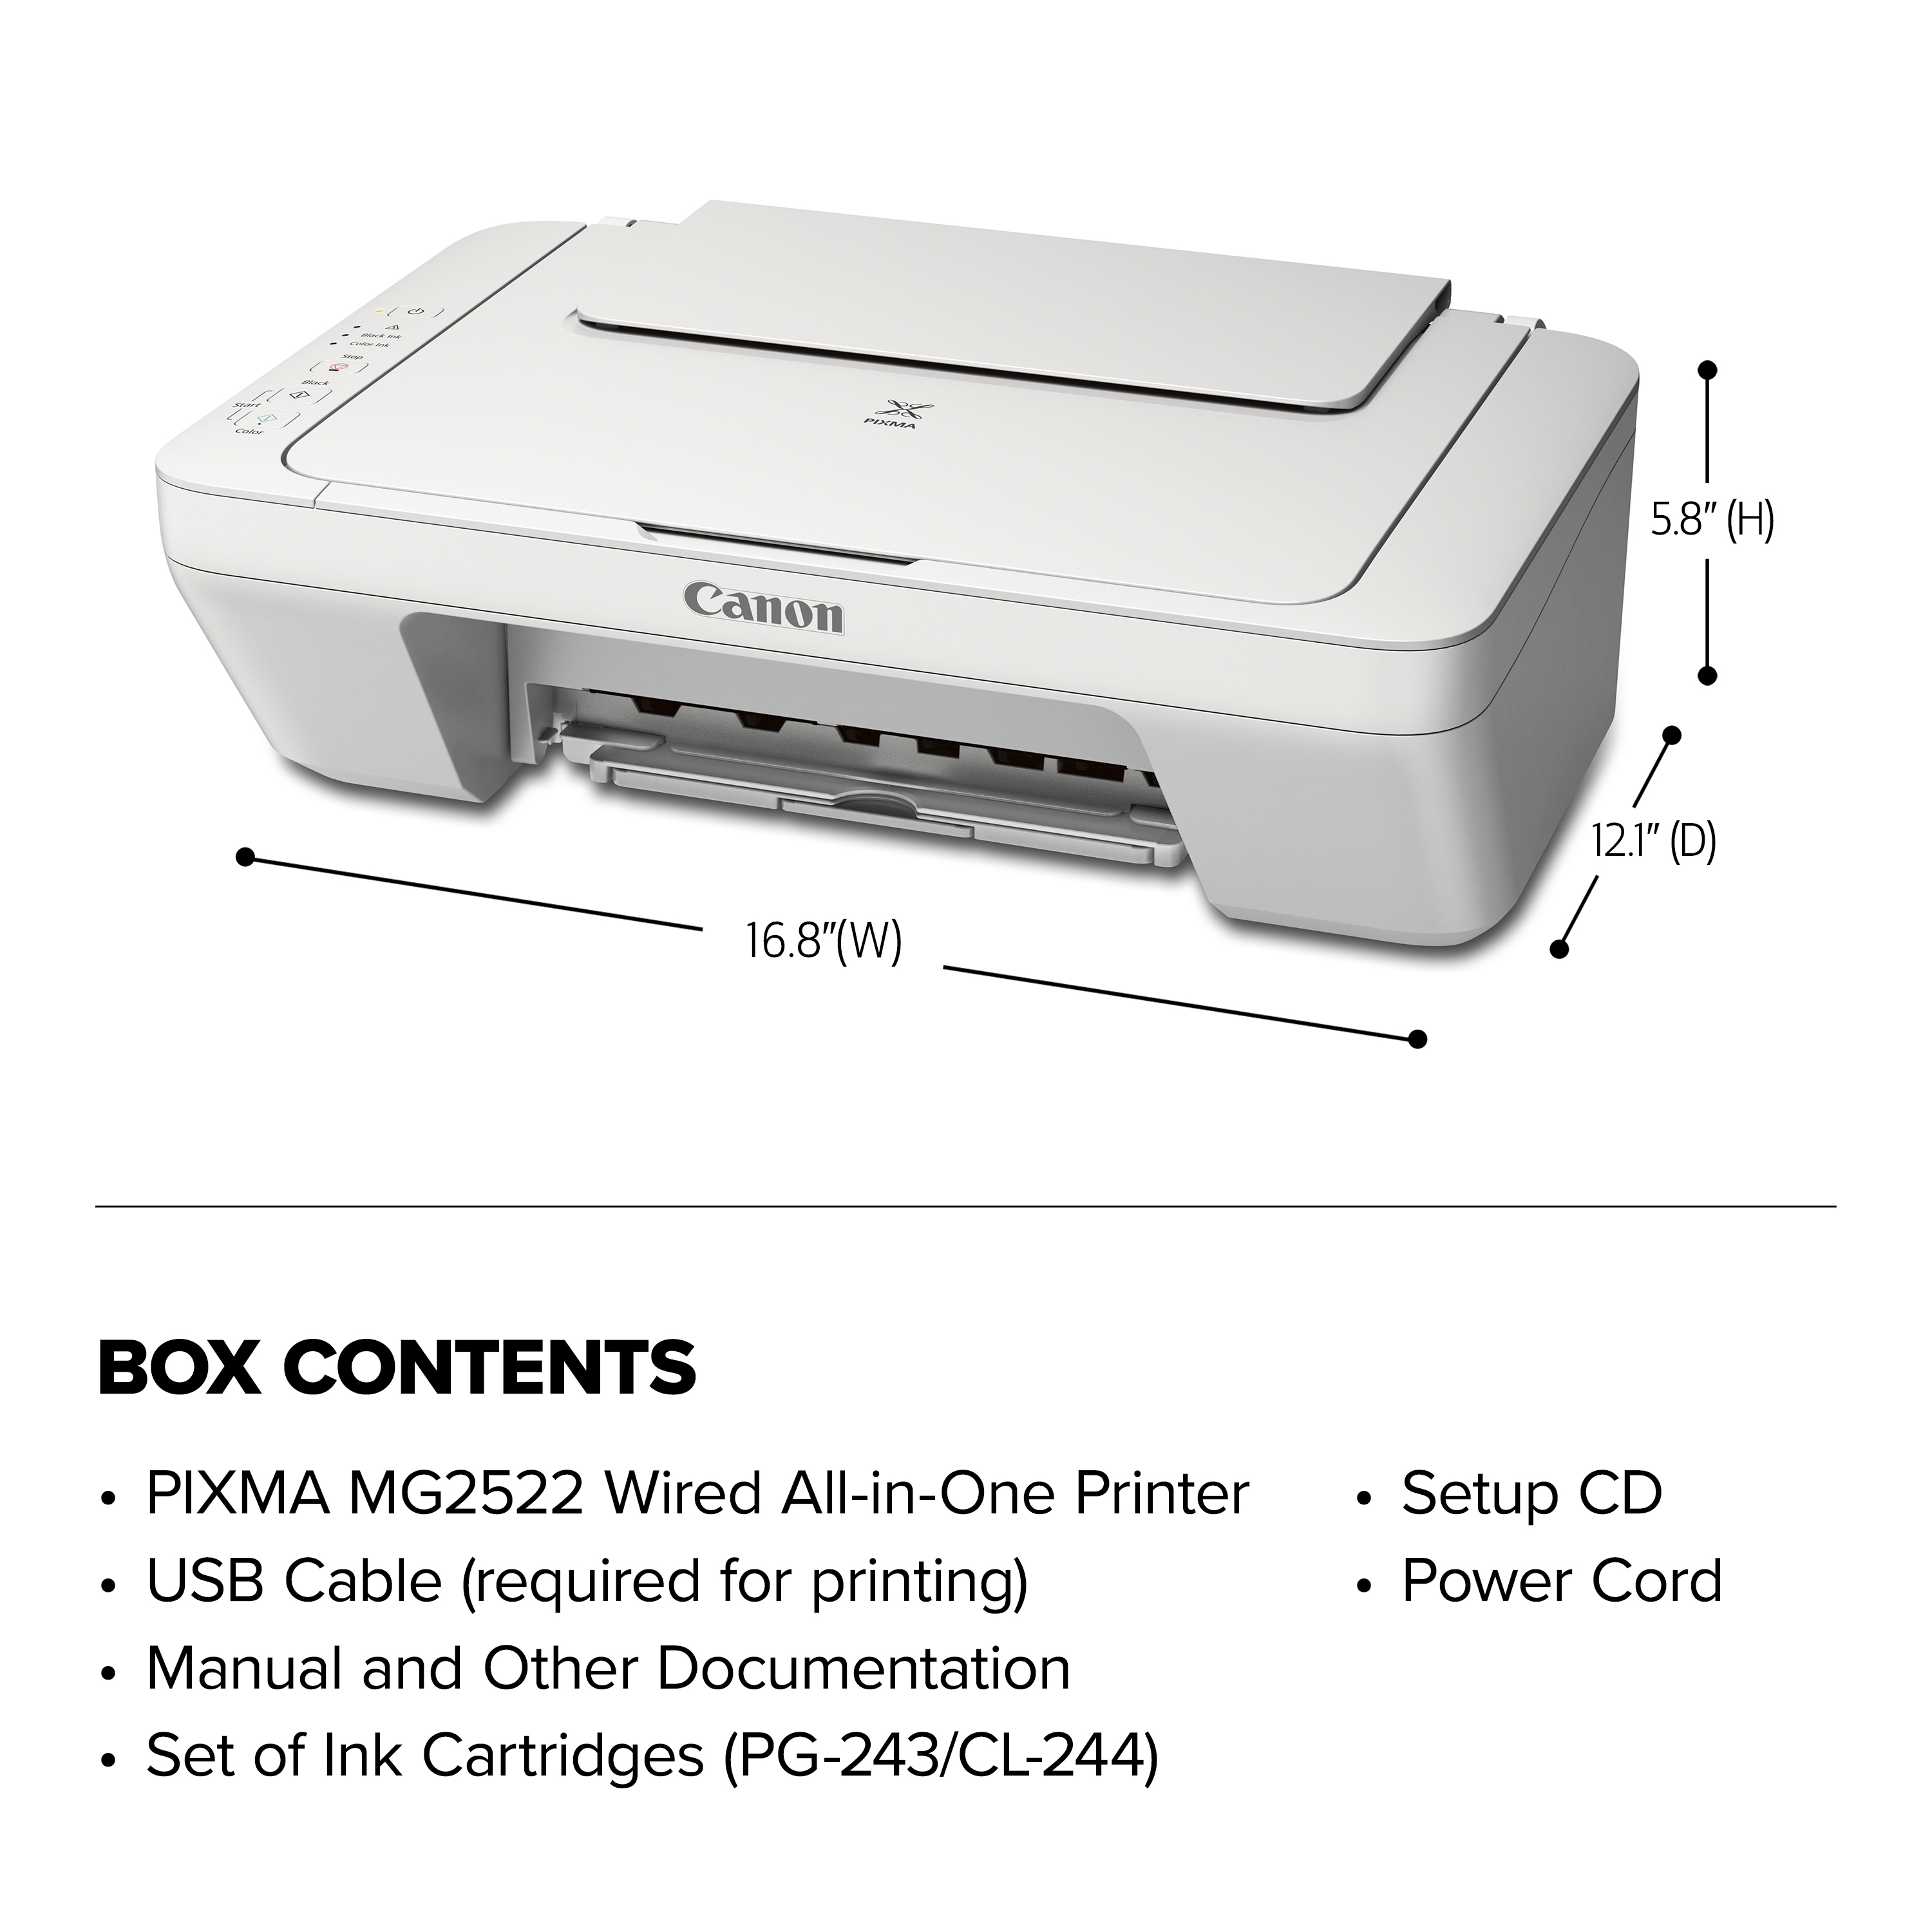 Canon PIXMA MG2522 Wired All-in-One Color Inkjet Printer [USB Cable Included], White - image 4 of 6